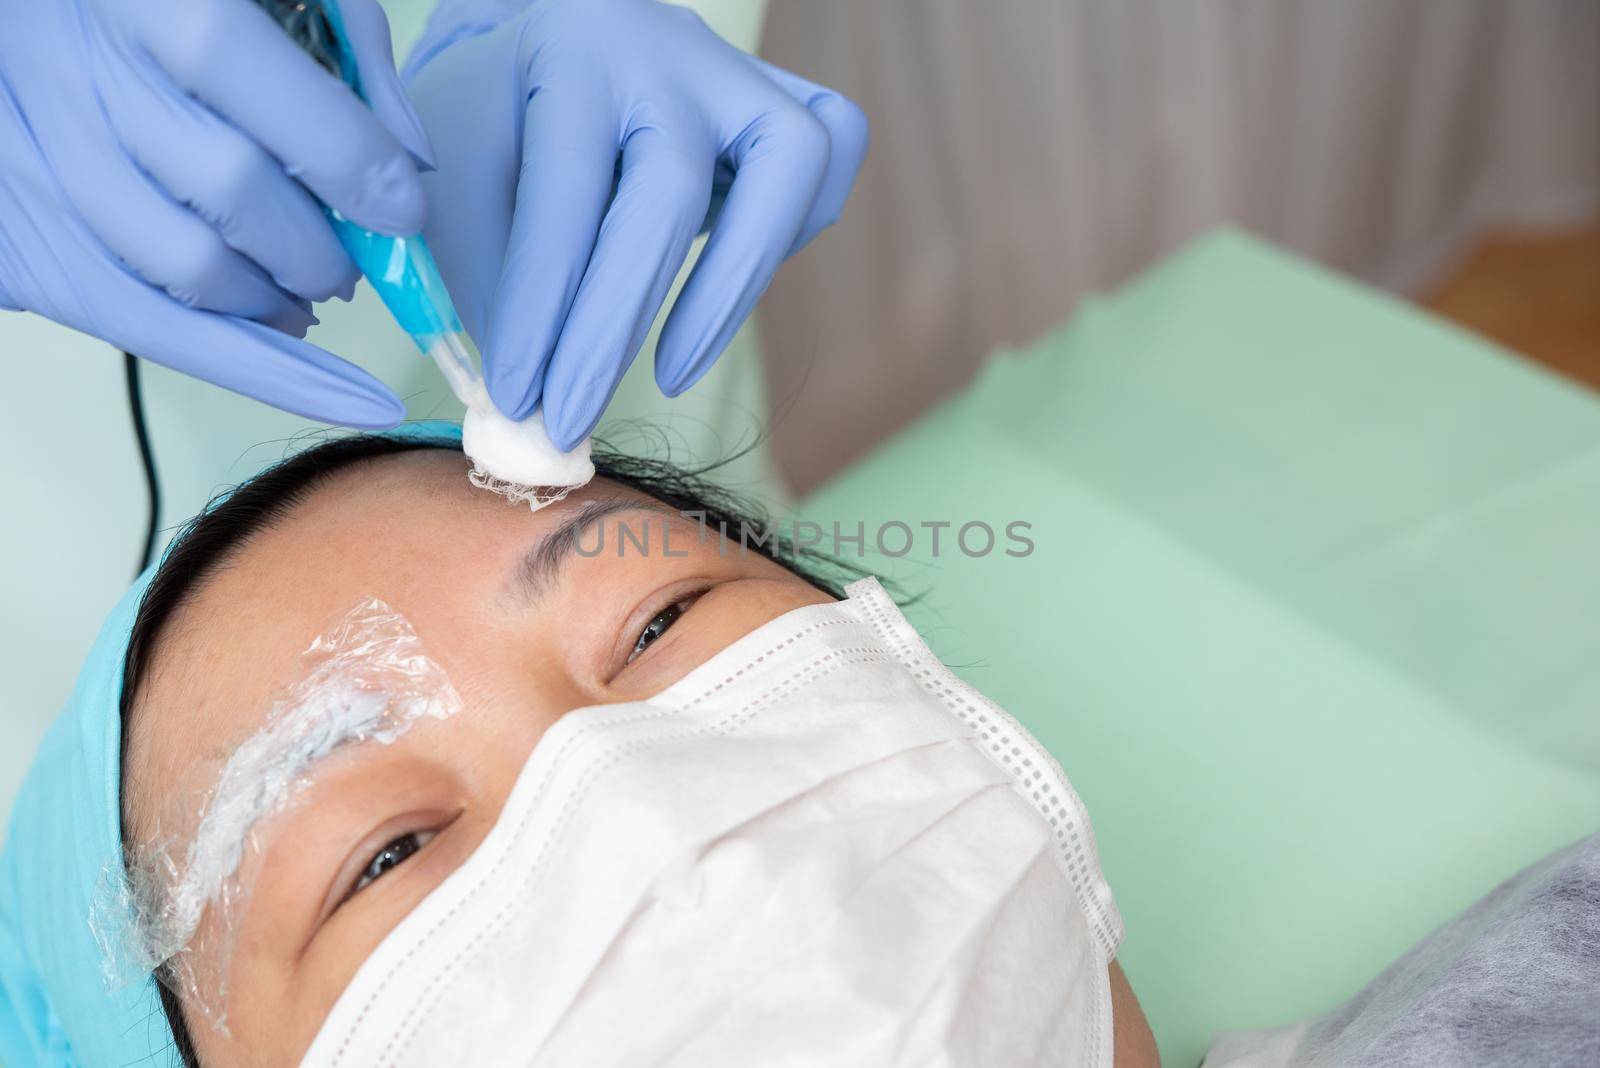 Asian woman eyebrow tattooing by doctor specialist in Eyebrow tattoo clinic or Eyebrow embroidery clinic for tattoo or correction use COVID-19 prevention policy protect by use mask and face shield